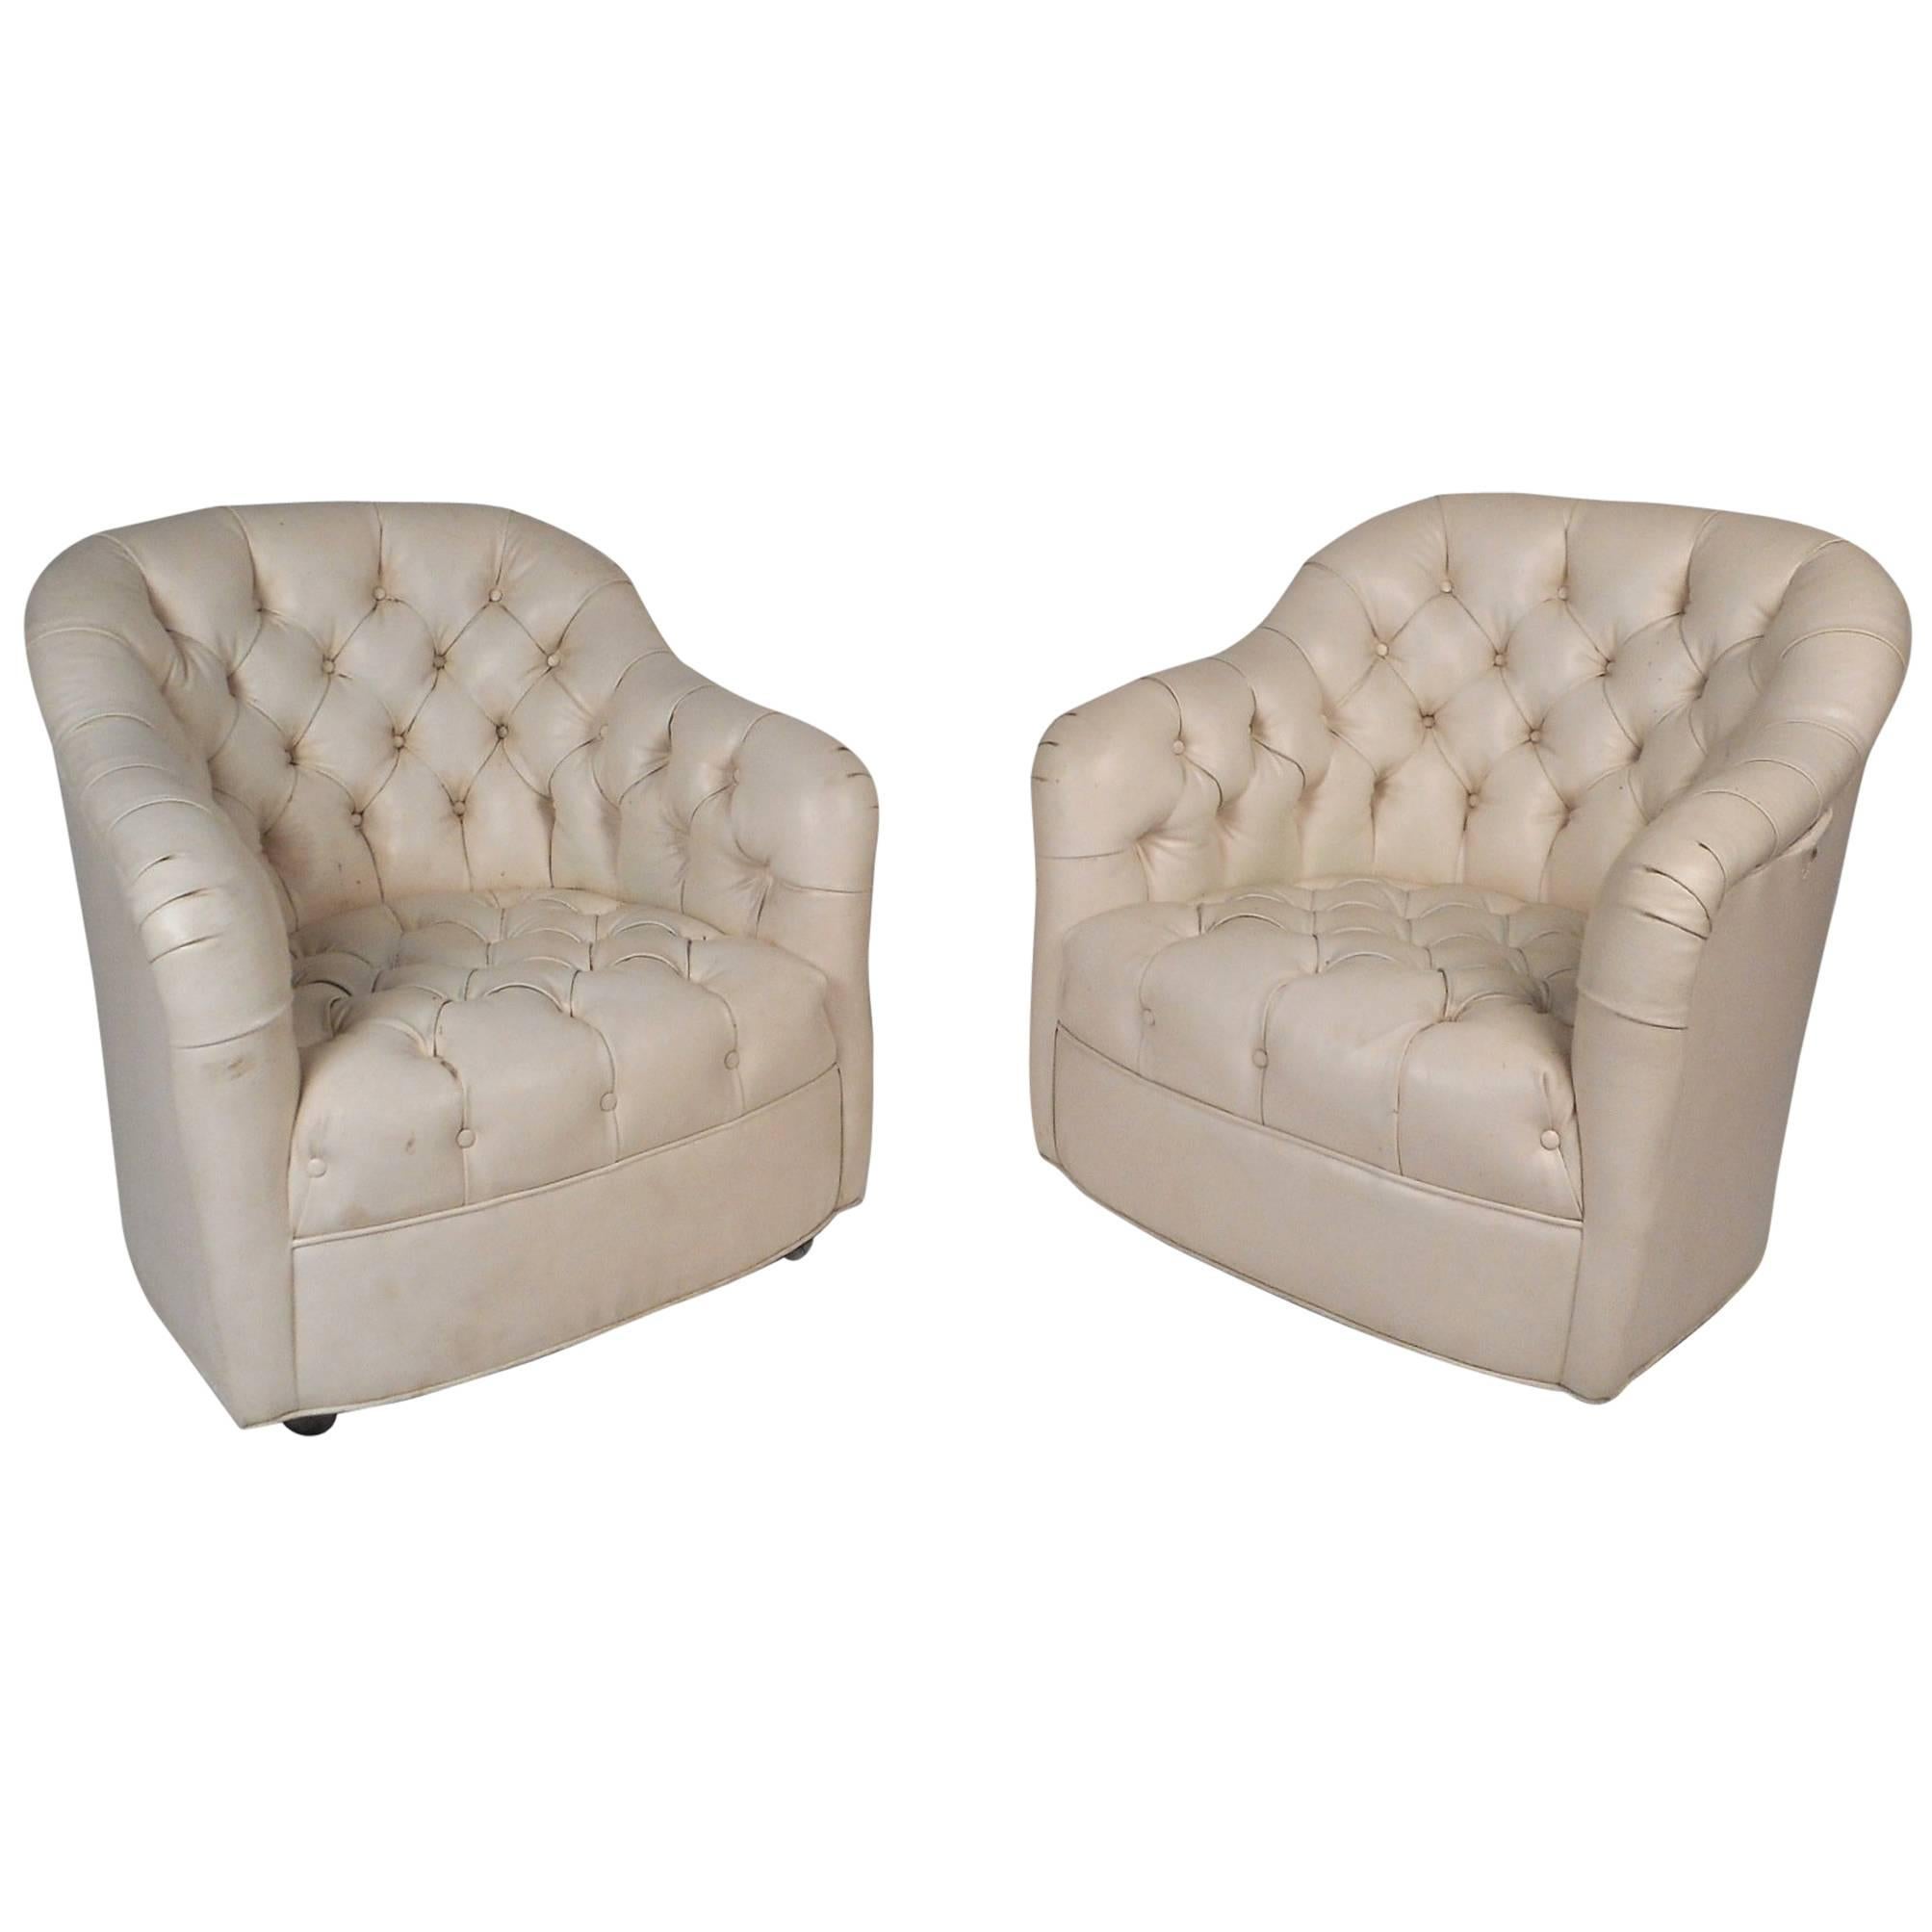 Pair of Mid-Century Modern Tufted Vinyl Lounge Chairs For Sale